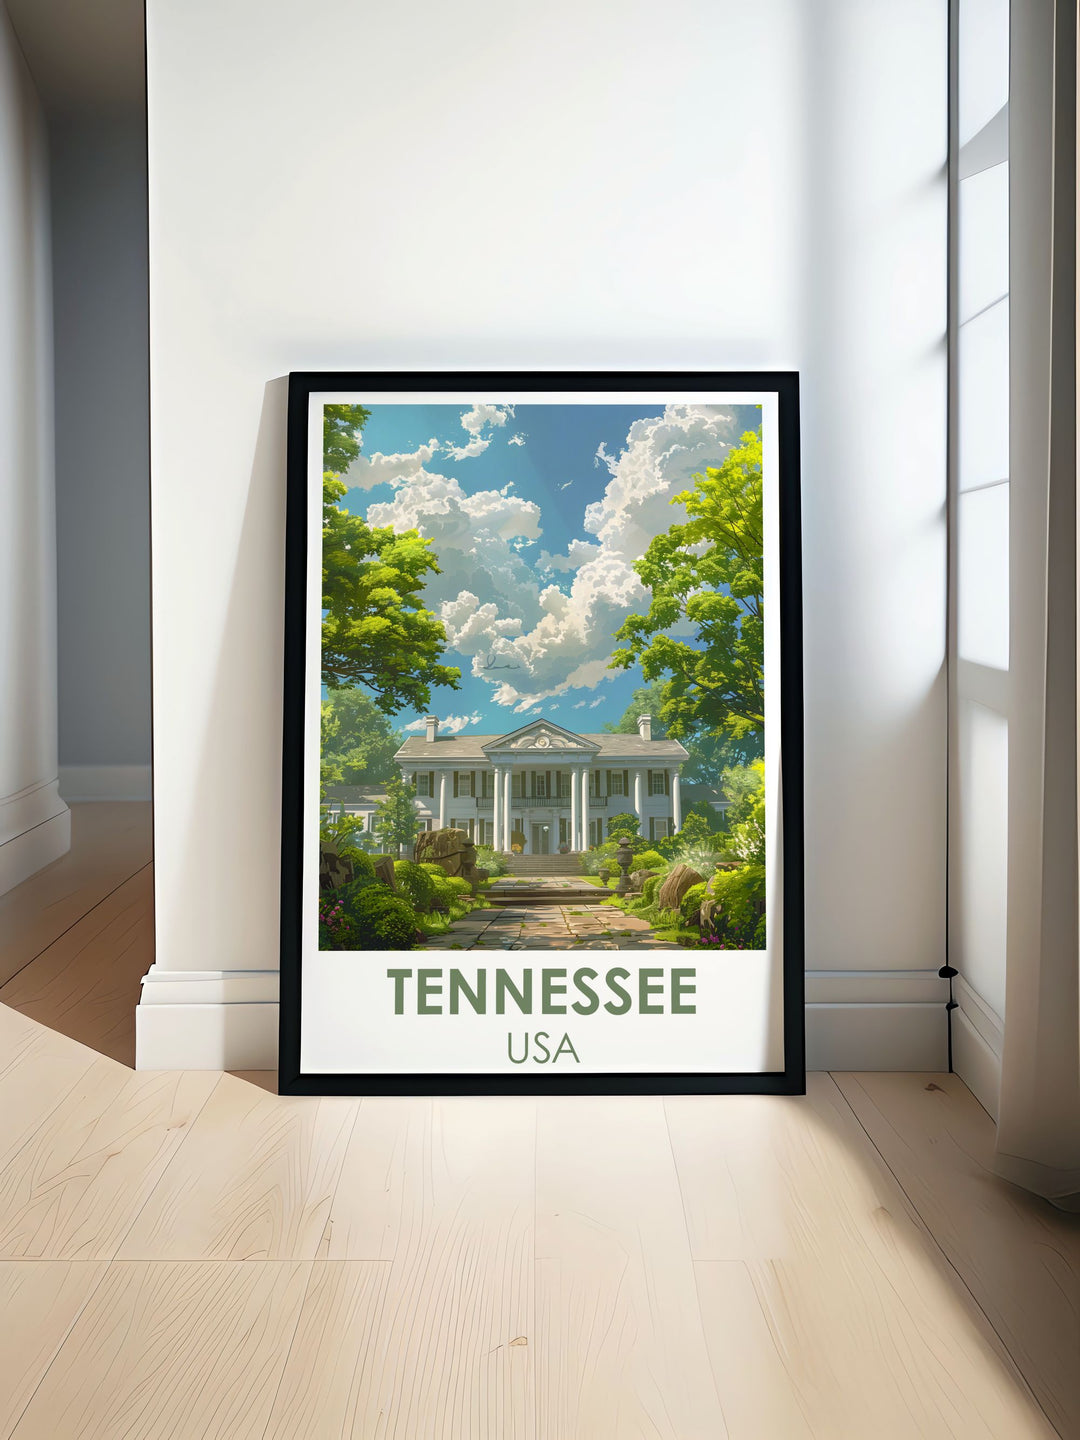 Ryman Auditorium Country Music Art featuring the iconic Nashville Tennessee venue with vibrant colors and intricate details. Perfect for fans of the Grand Ole Opry this Nashville poster makes a great addition to any Country Music Print collection and Graceland Digital home decor.